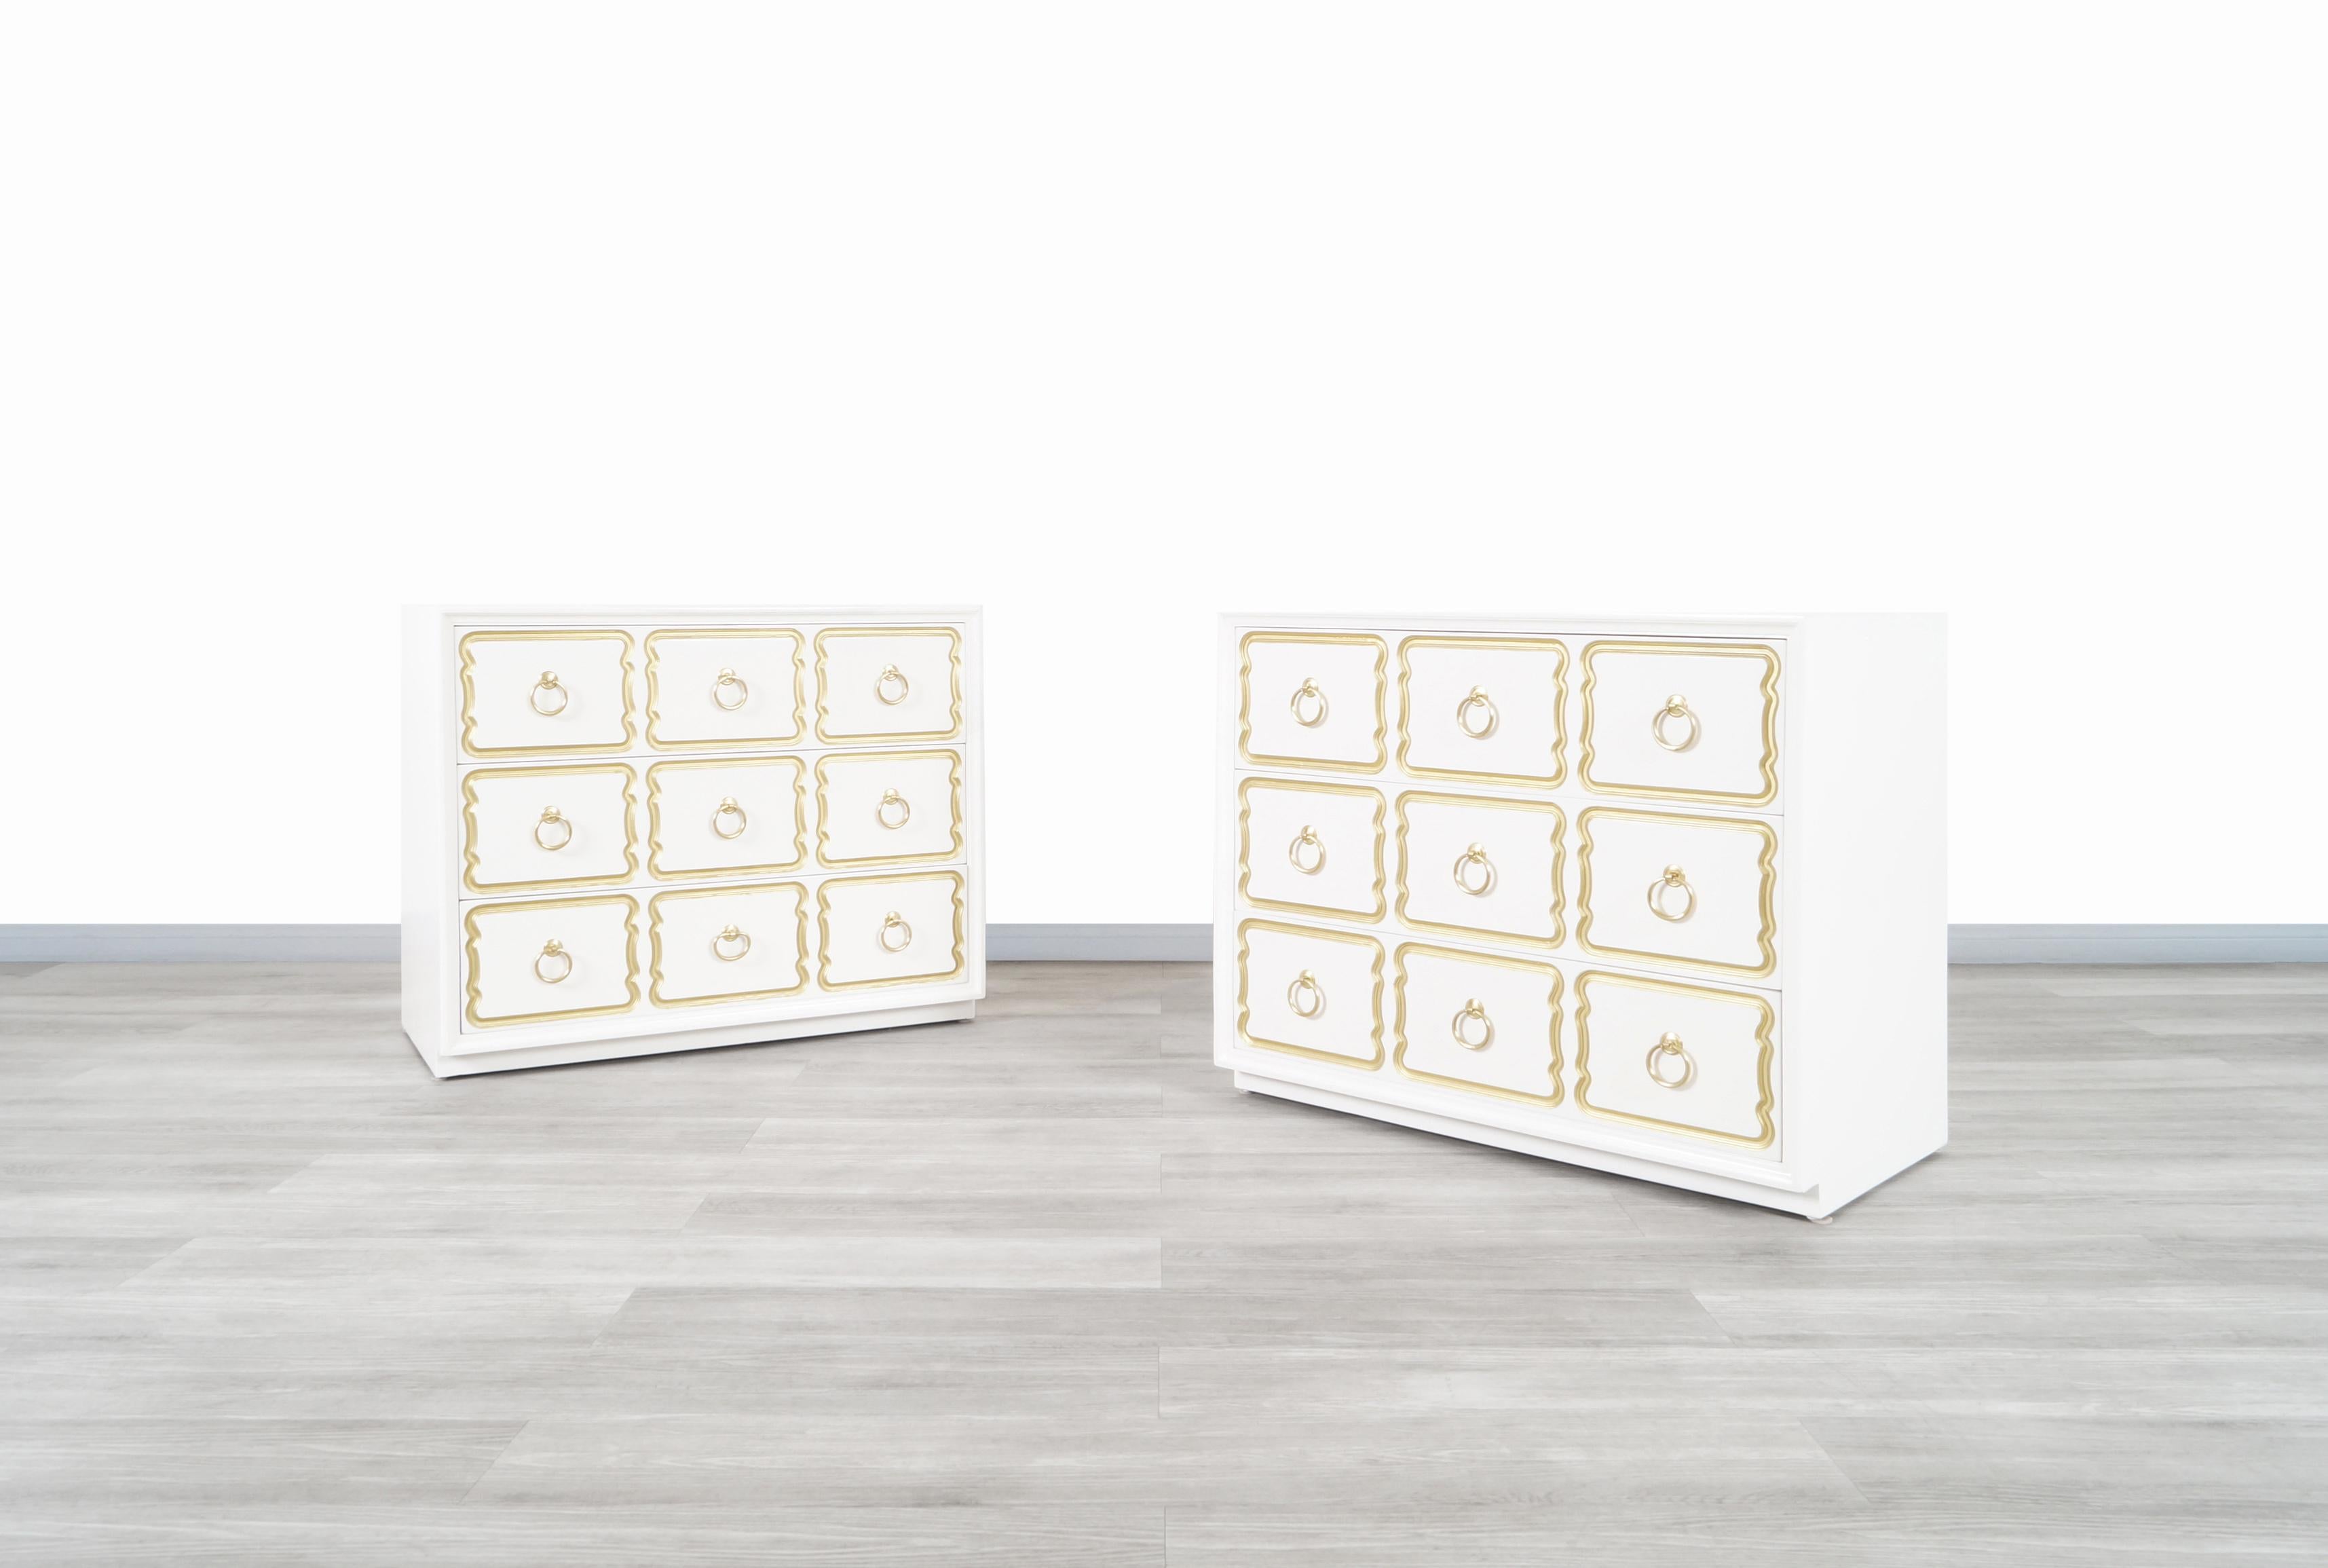 Beautiful vintage lacquered “España” chests of drawers by Dorothy Draper for Heritage Henredon in the United States, circa 1950s. These chests of drawers are built from the highest quality wood with a white lacquered finish. Each chest has three